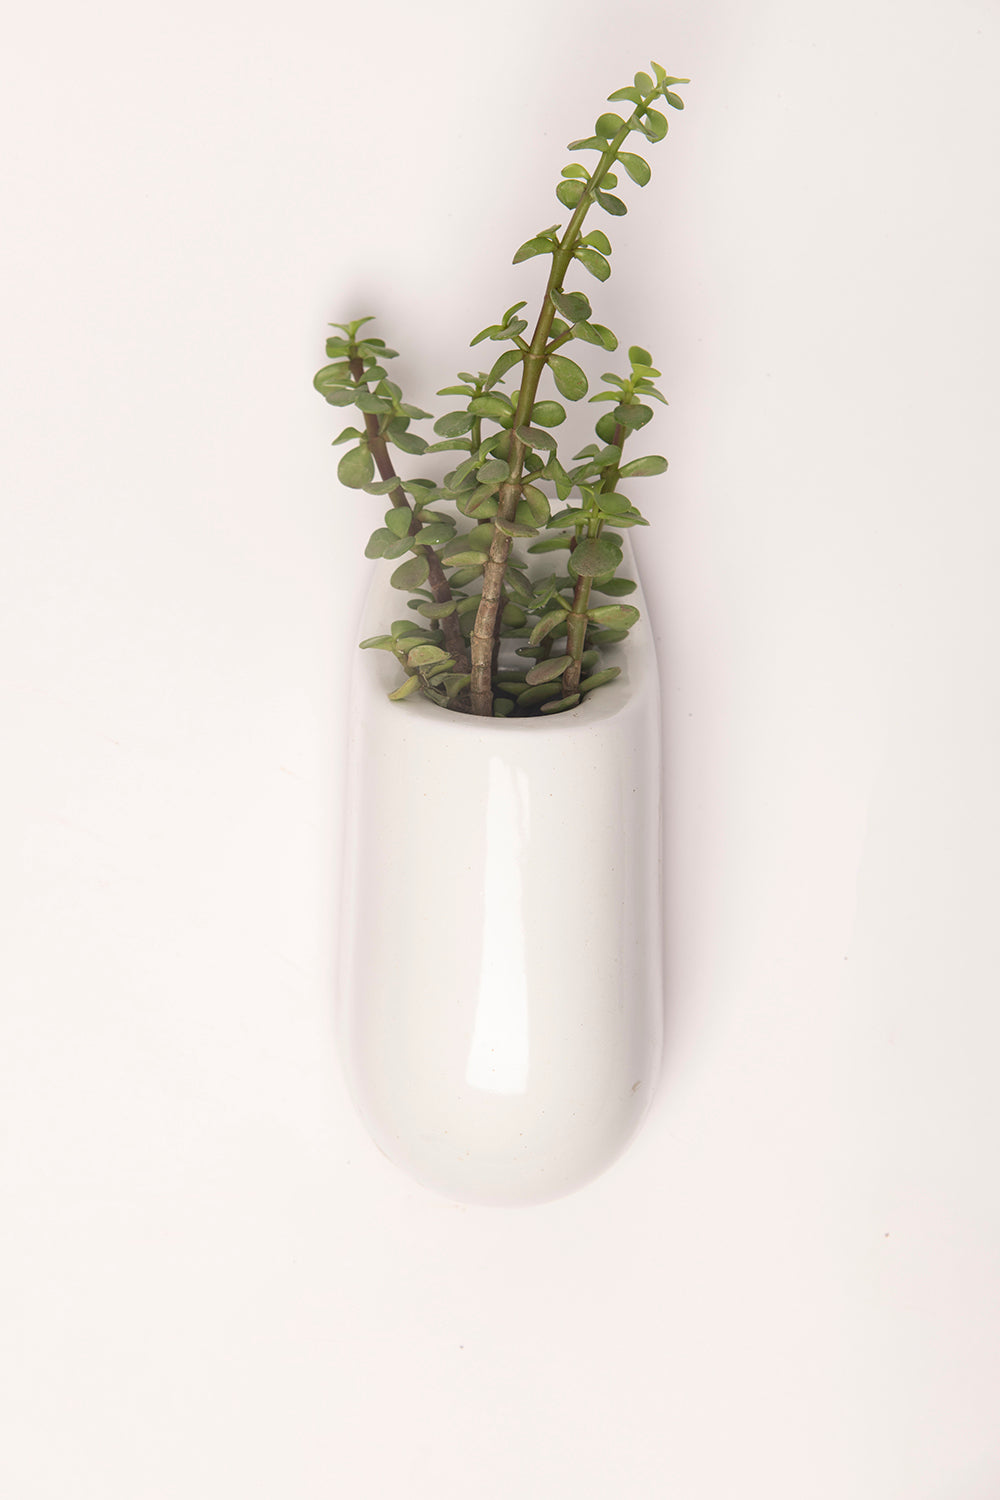 Pocket size Hanging Solitaires Wall mountain planter in white color with Portulacaria Afra plant